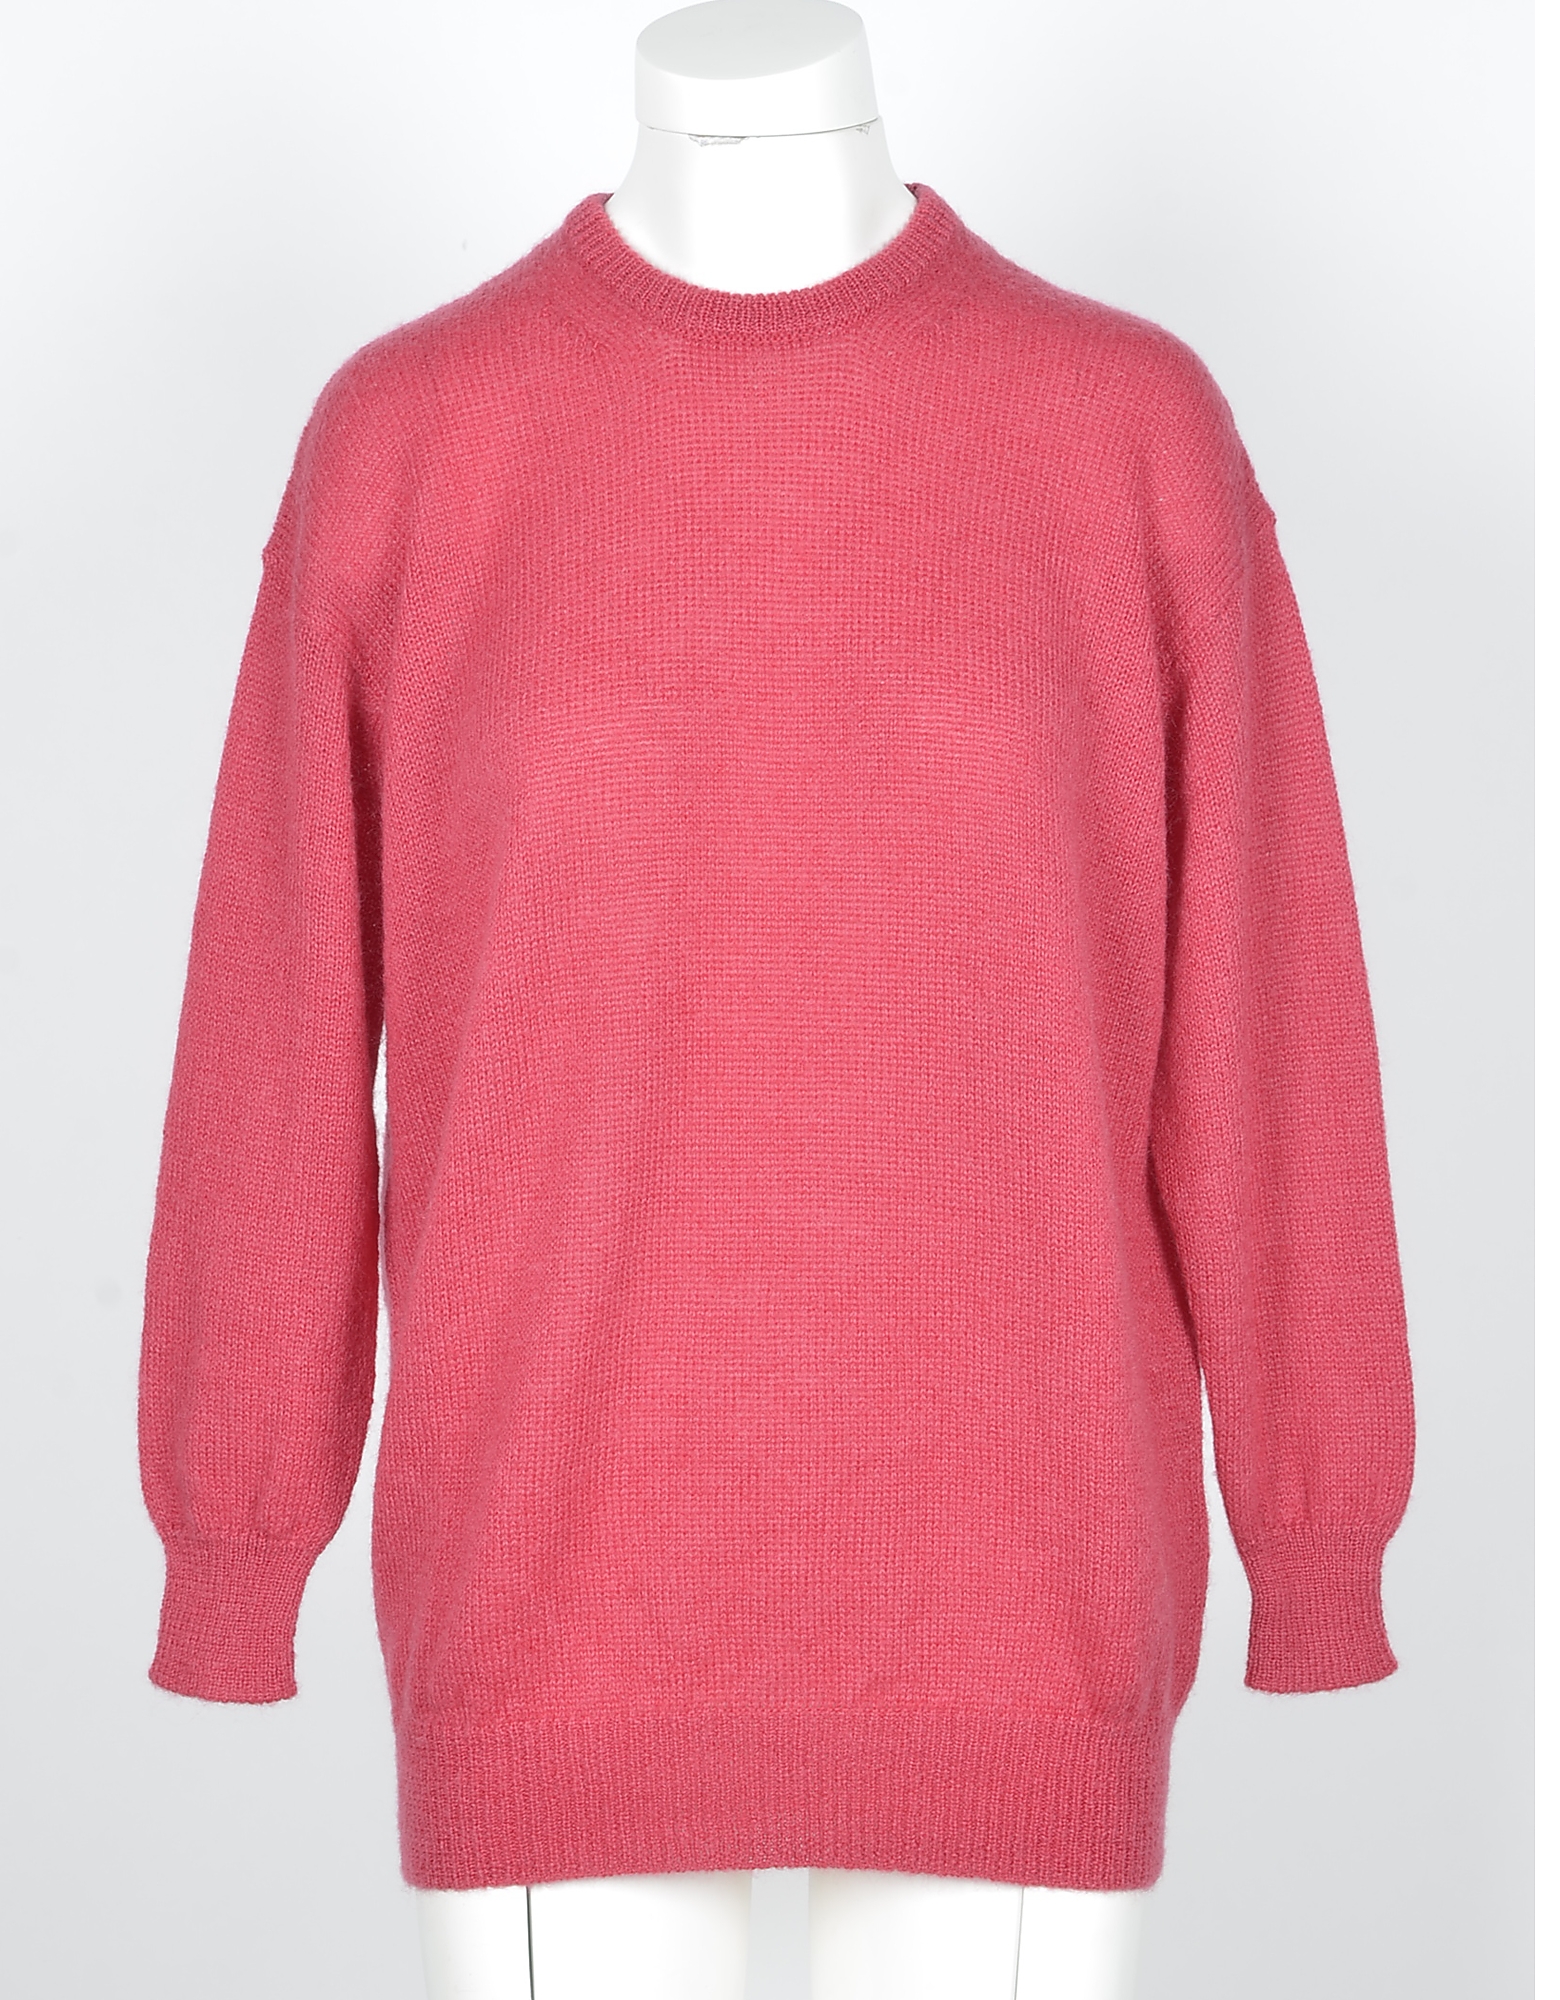 Max Mara Designer Knitwear, Strawberry Red Mohair and Wool Women's Sweater